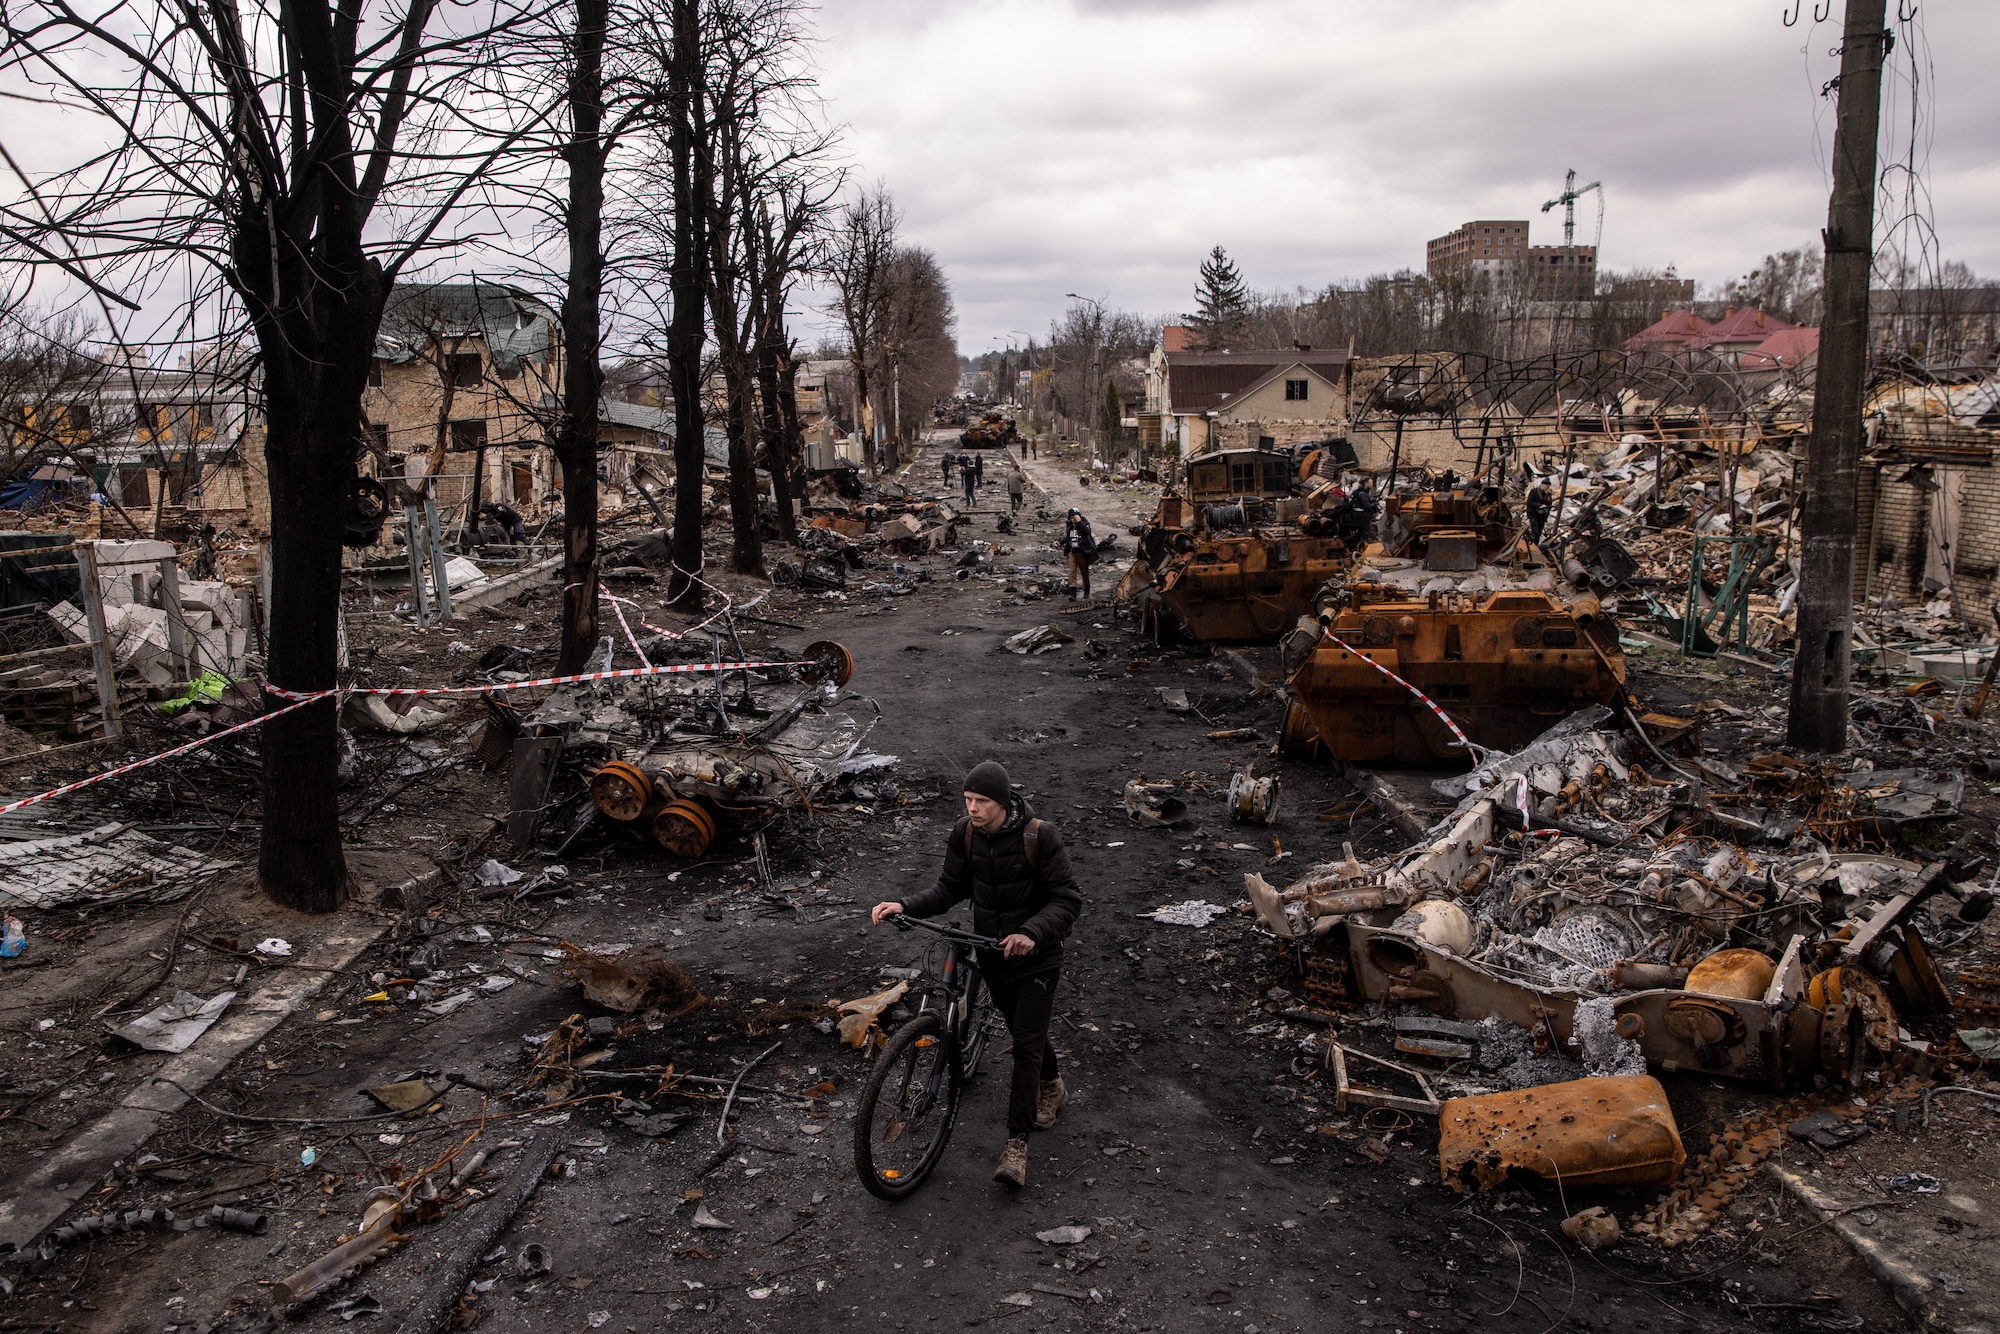 A man pushes his bike through debris and destroyed Russian military vehicles on April 6, 2022, in Bucha, Ukraine.